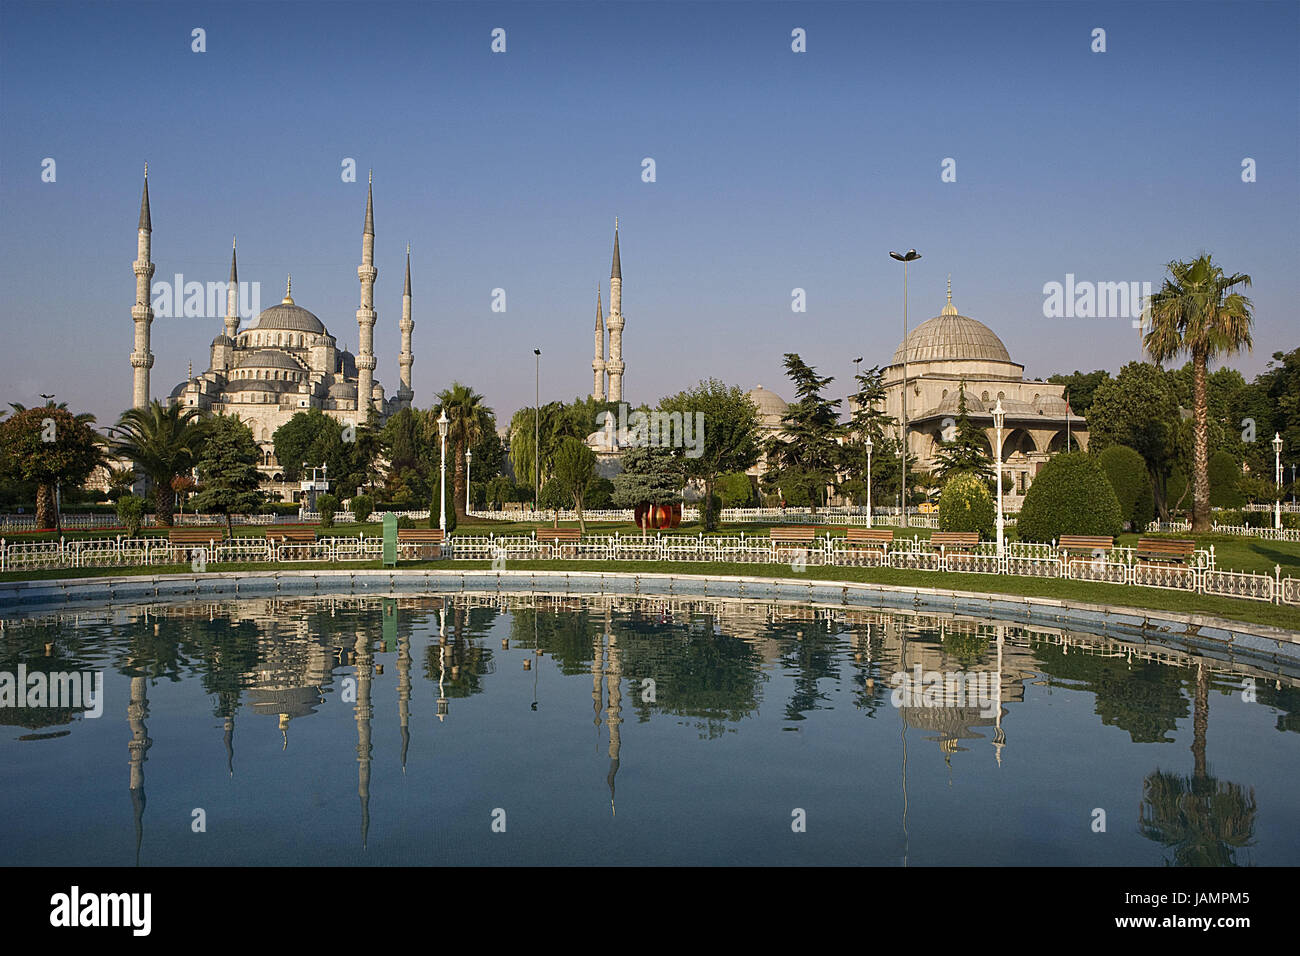 Turkey,Istanbul,sultan Ahmet Camii,'blue mosque',mirroring,water surface,town,city,metropolis,port,culture,faith,religion,Islam,structure,historically,architecture,church,sacred construction,Sultan-Ahmet-Camii,sultan's Ahmed's mosque,mosque,domed building,towers,landmarks,places of interest,minarets,domes,outside,deserted,palms,trees,water cymbals,park, Stock Photo